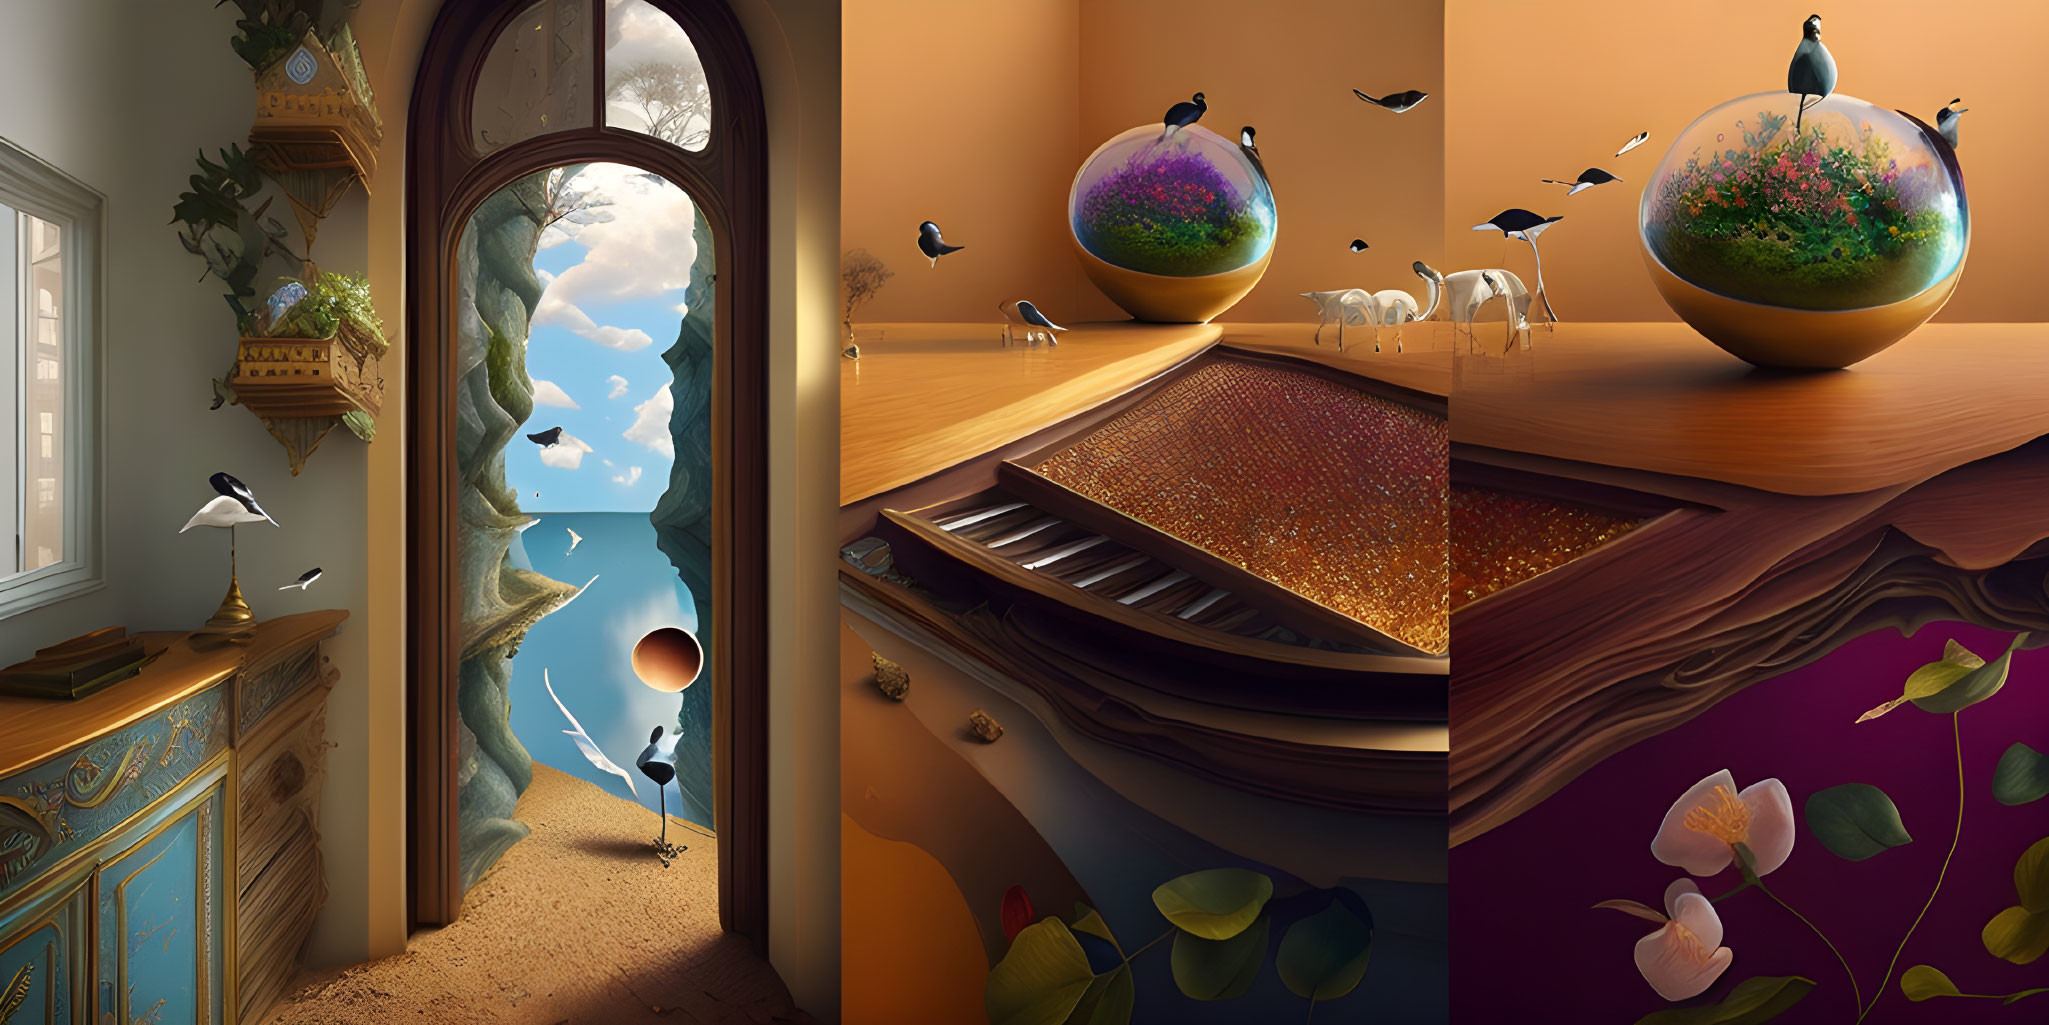 Whimsical triptych of surreal indoor scenes: floating balloon, birds by terrarium, butterflies